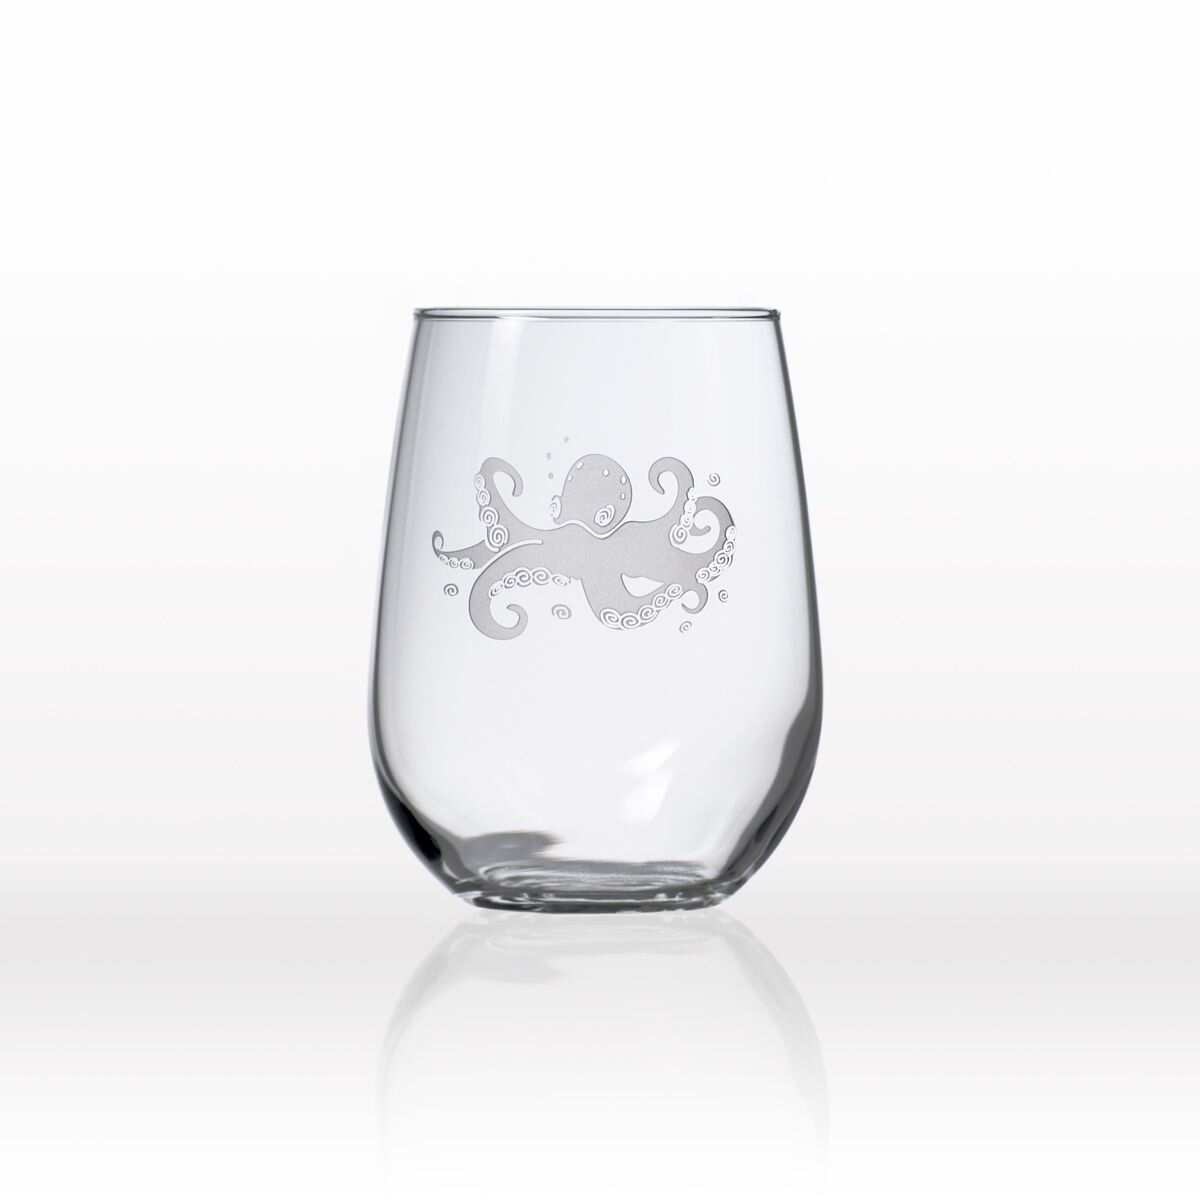 Modern Name Wine Glasses - Design: S4 - Everything Etched